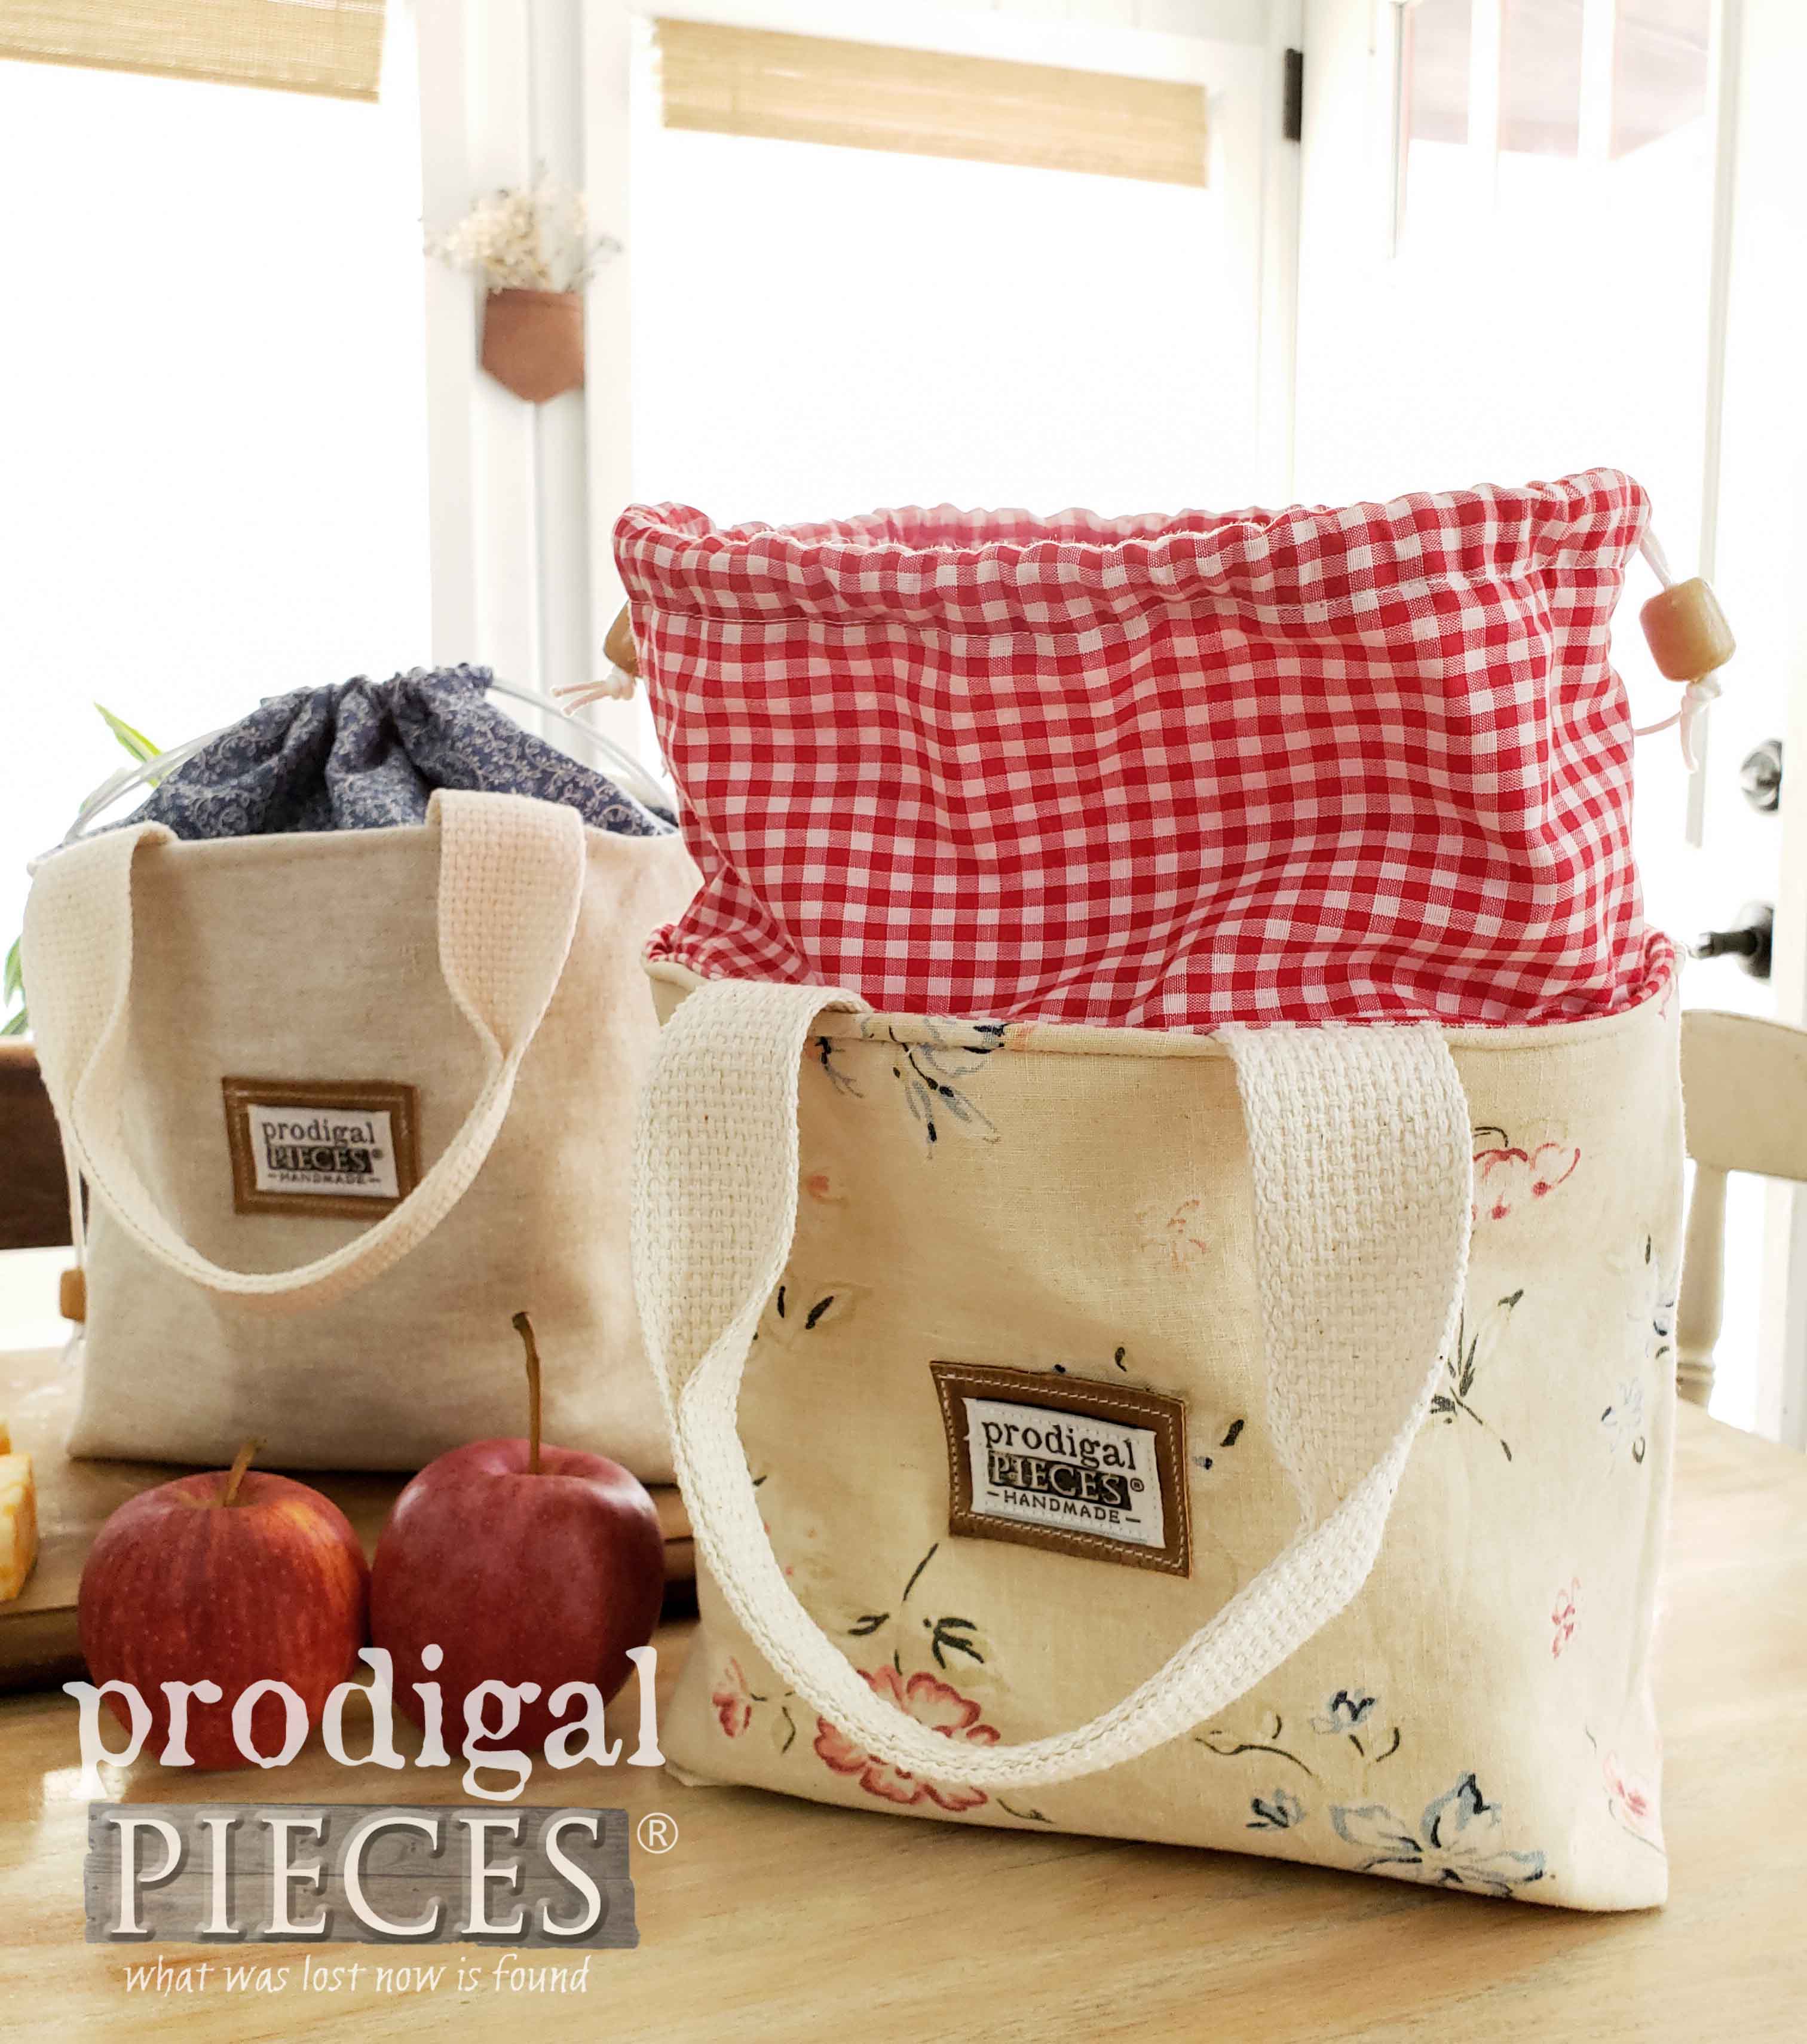 Red Gingham Lunch Bag Open by Prodigal Pieces | prodigalpieces.com #prodigalpieces #handmade #fashion #sewing